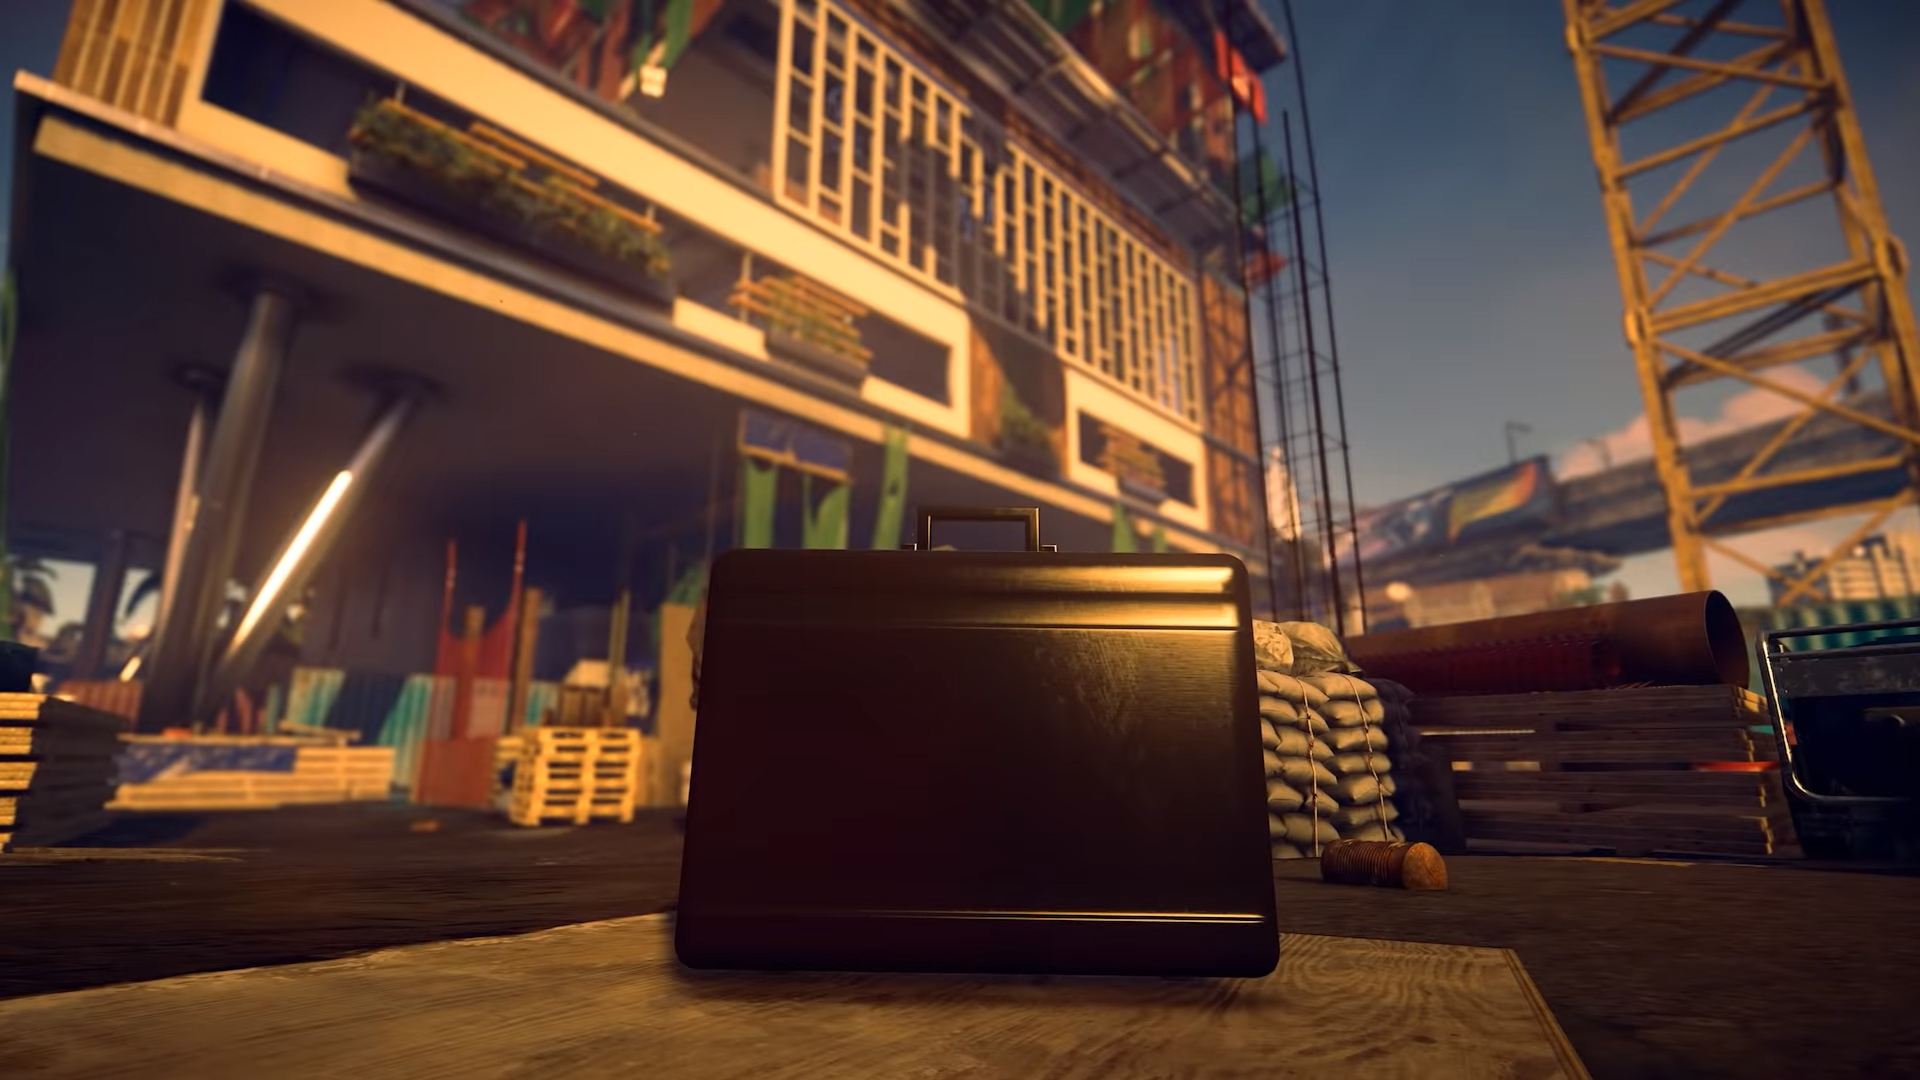 The briefcase is back in for Hitman 2 and this time it offers up new things...